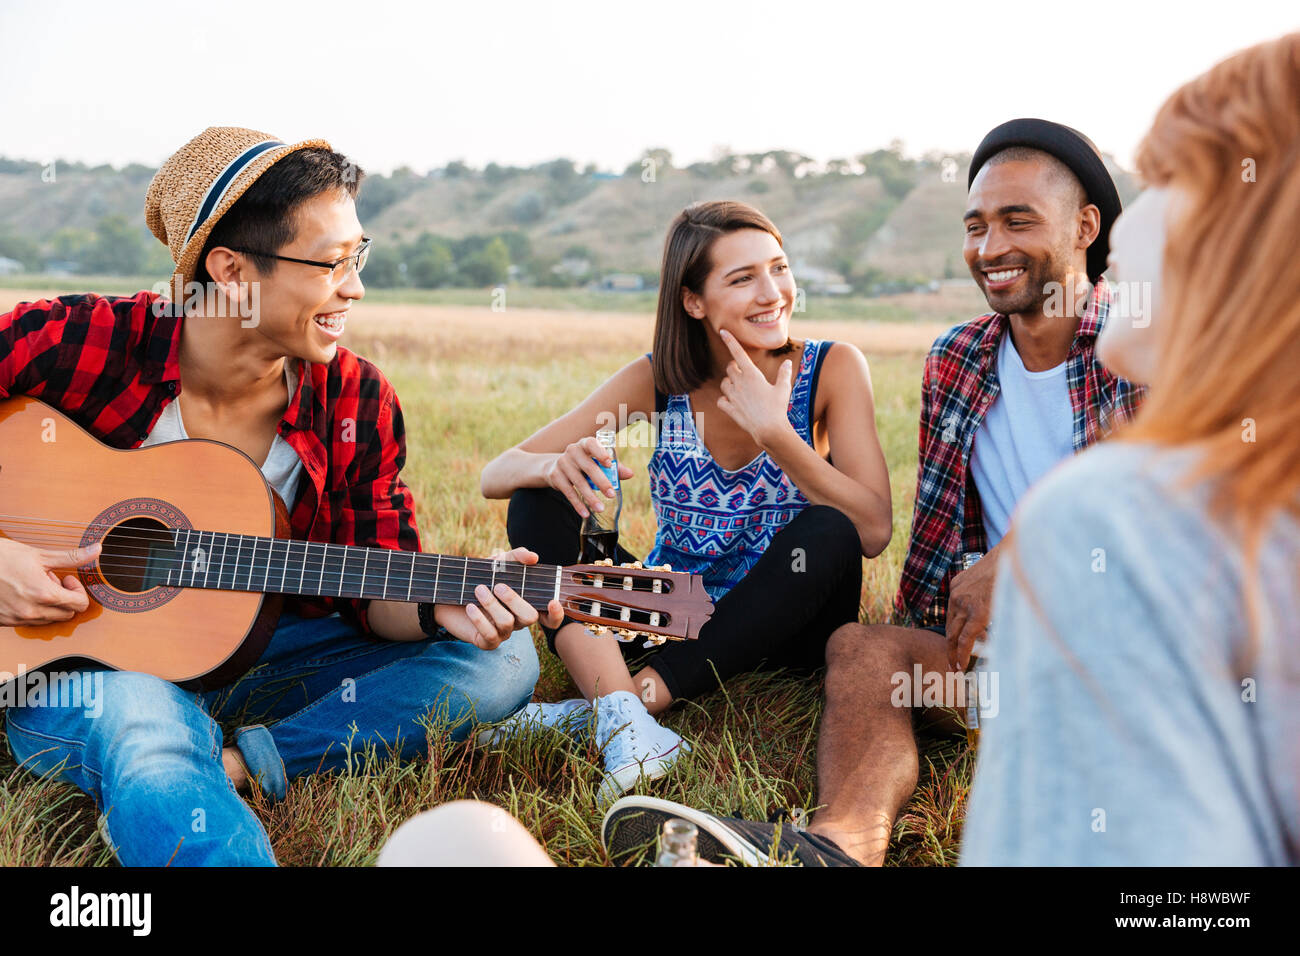 Group of smiling young friends drinking beer and playing guitar outdoors Stock Photo